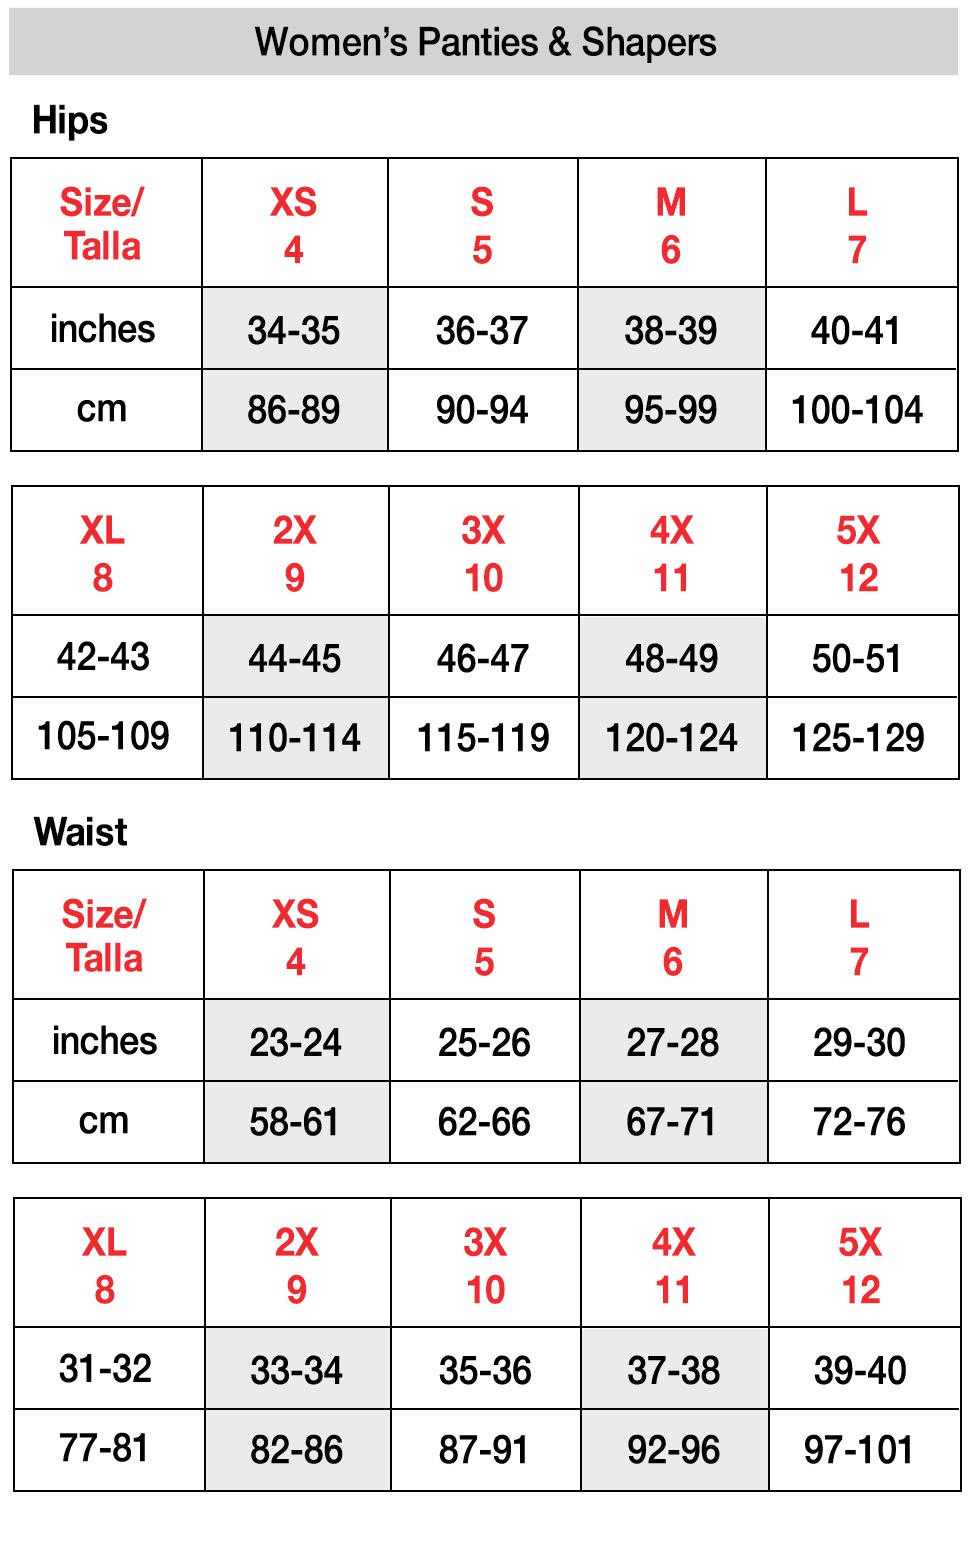 sizes for women's panties and shapes